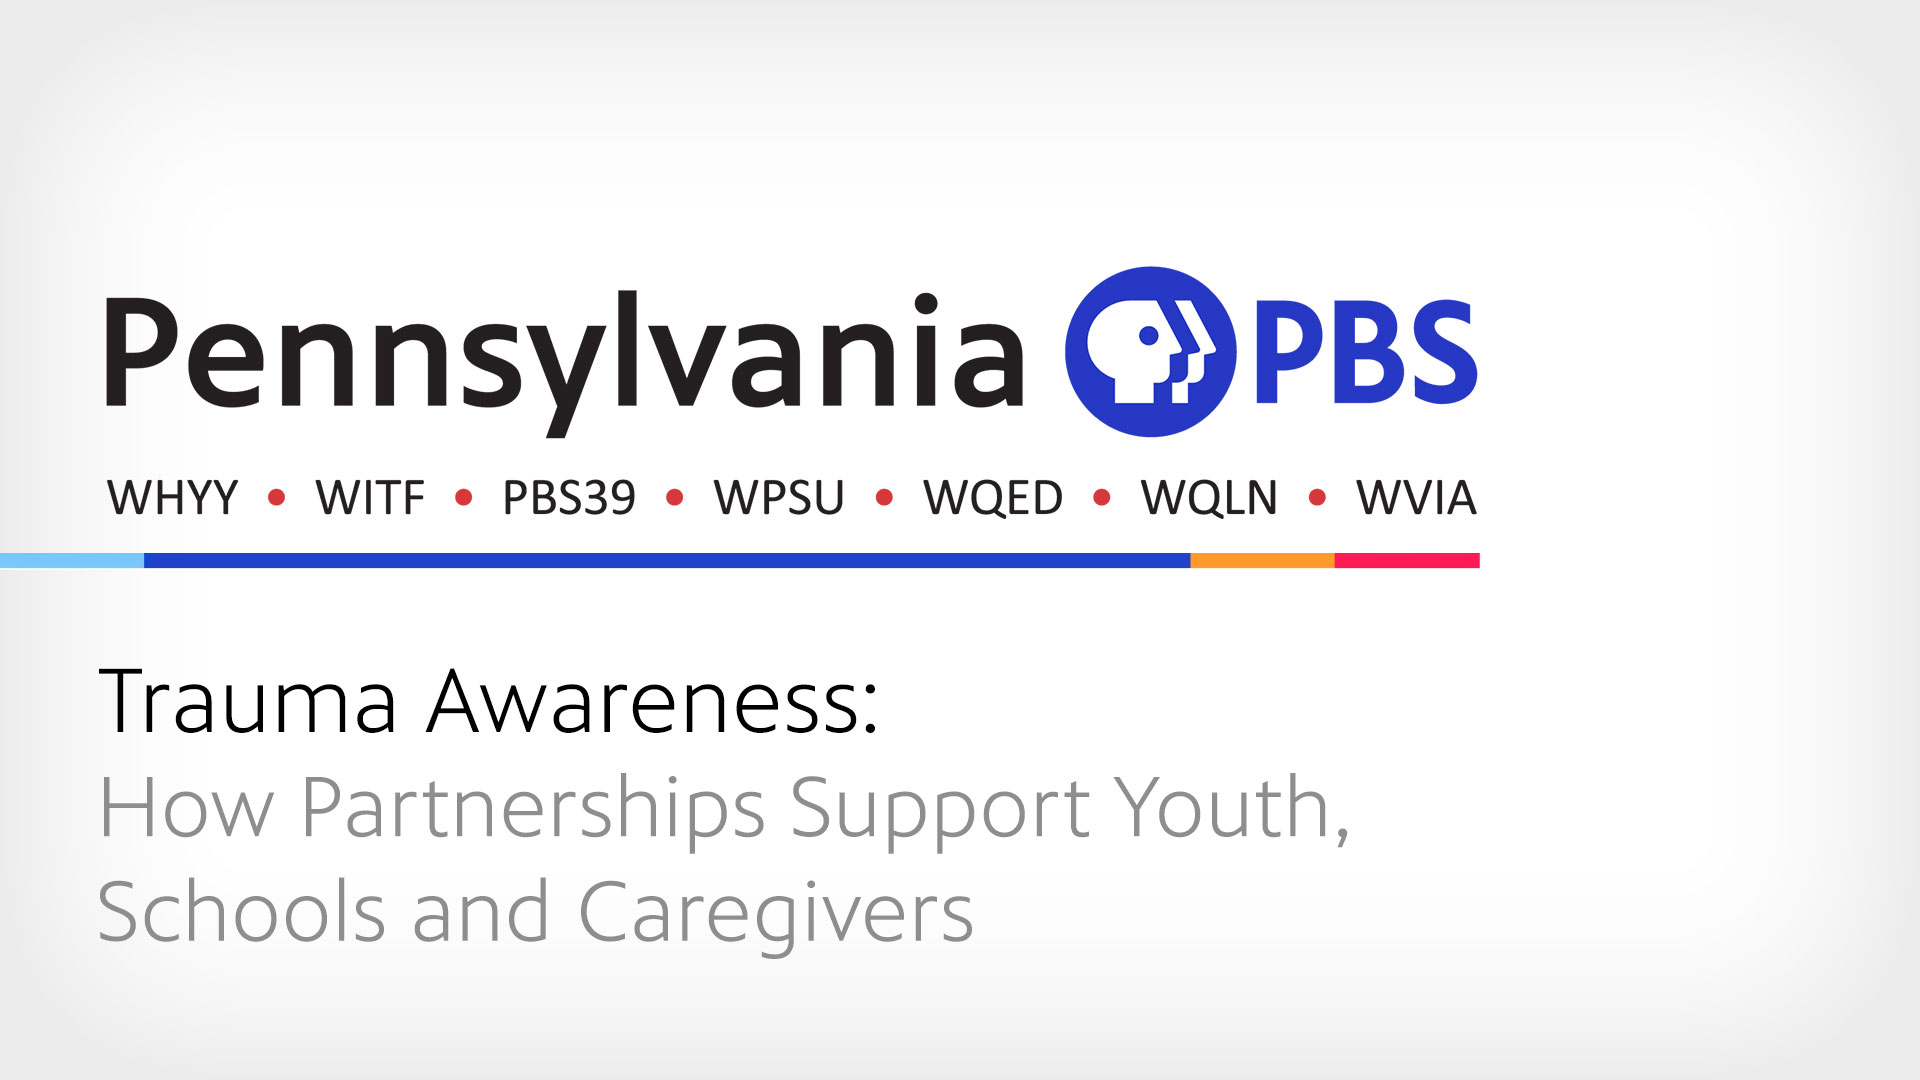 Trauma Awareness: How Partnerships Support Youth, Schools and Caregivers